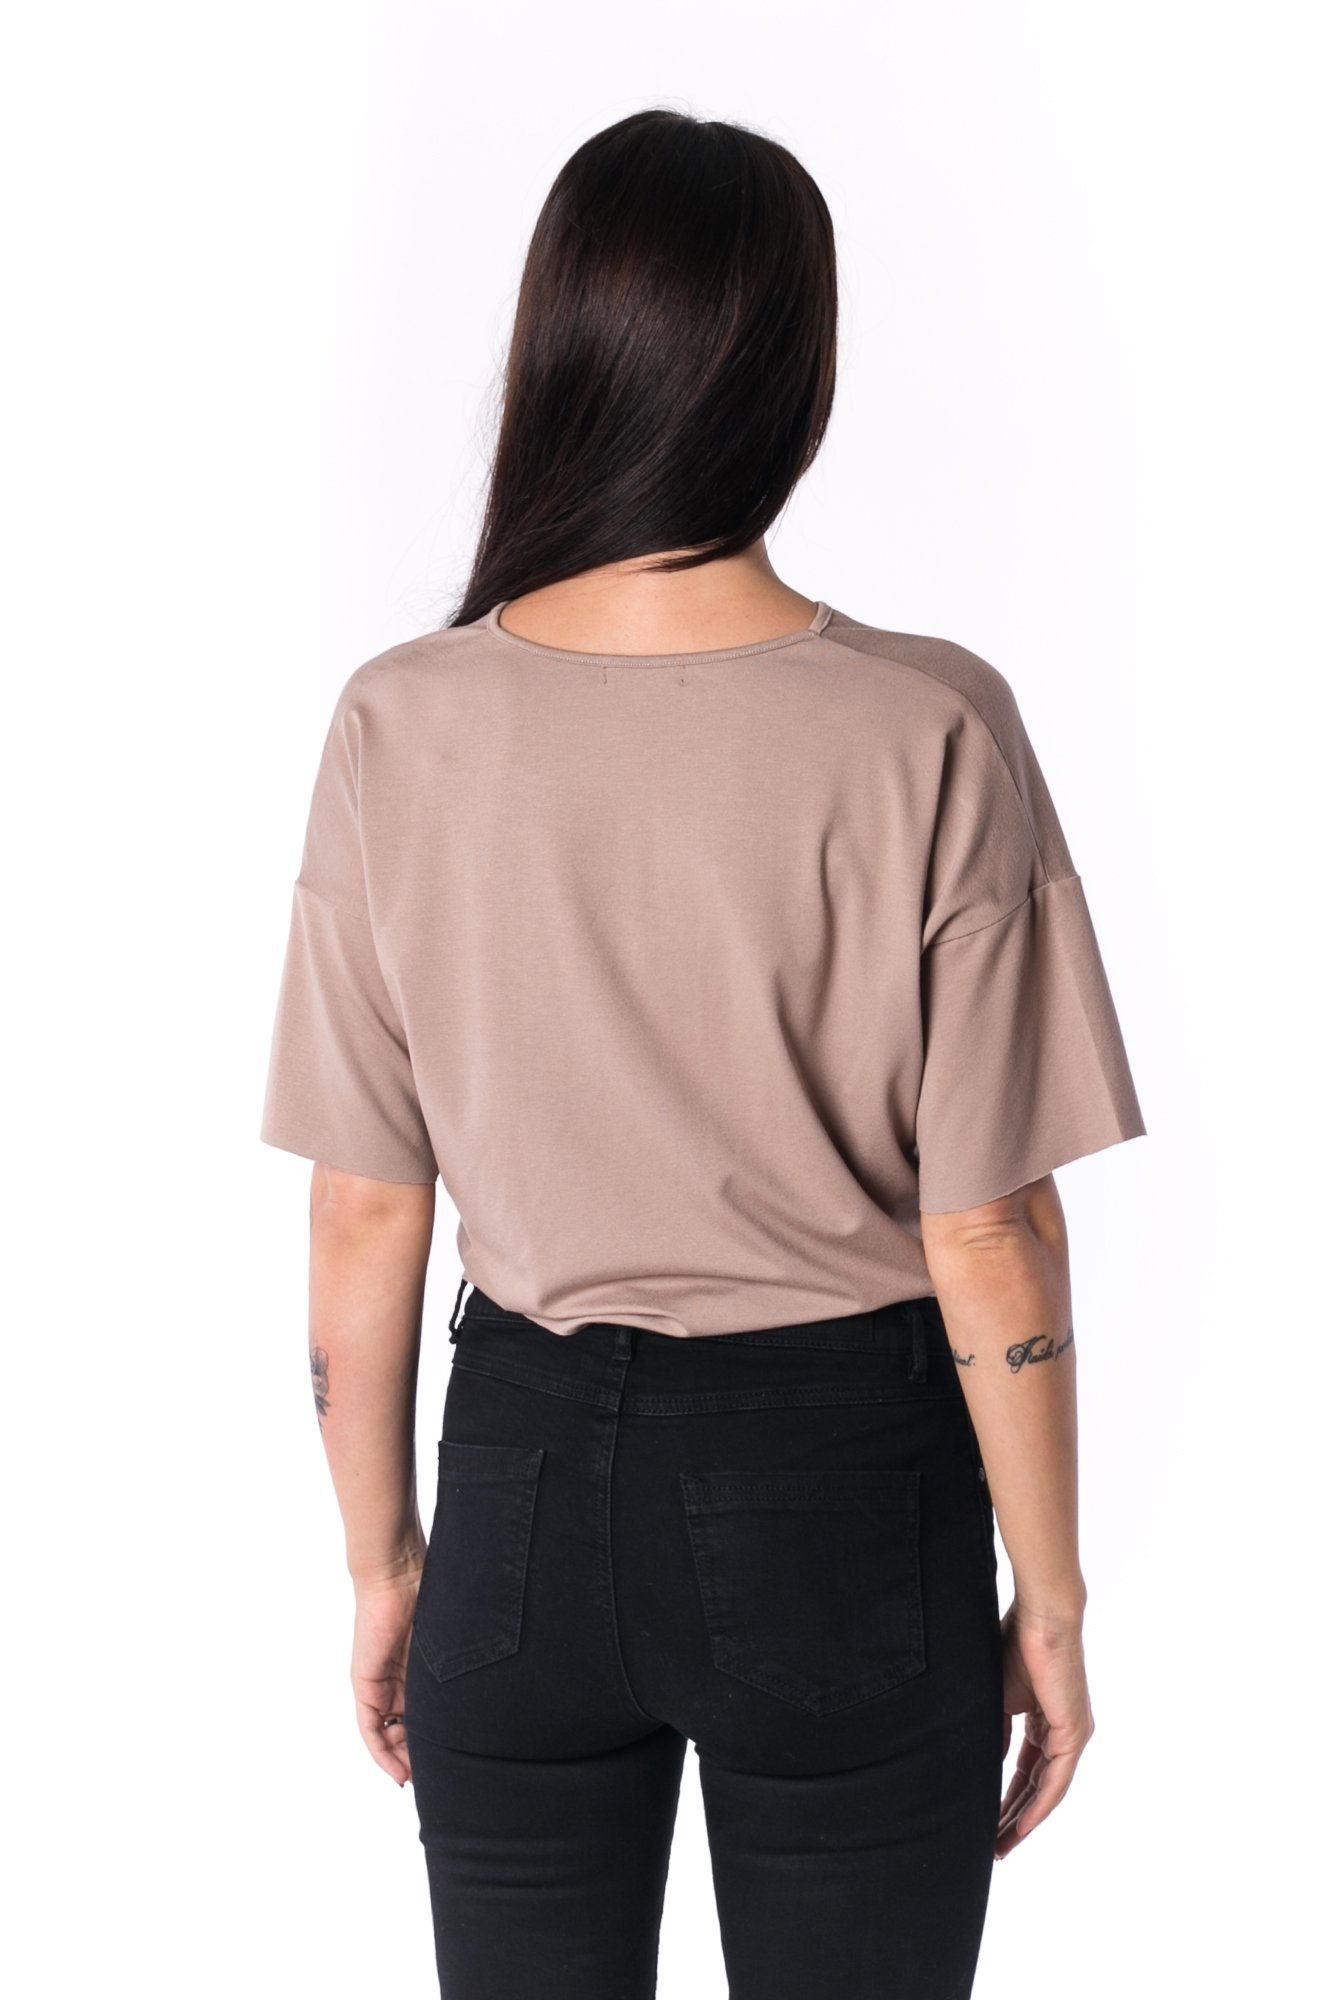 TheG Woman Panelled Oversize Crop V-Neck Tee 17 // mocca